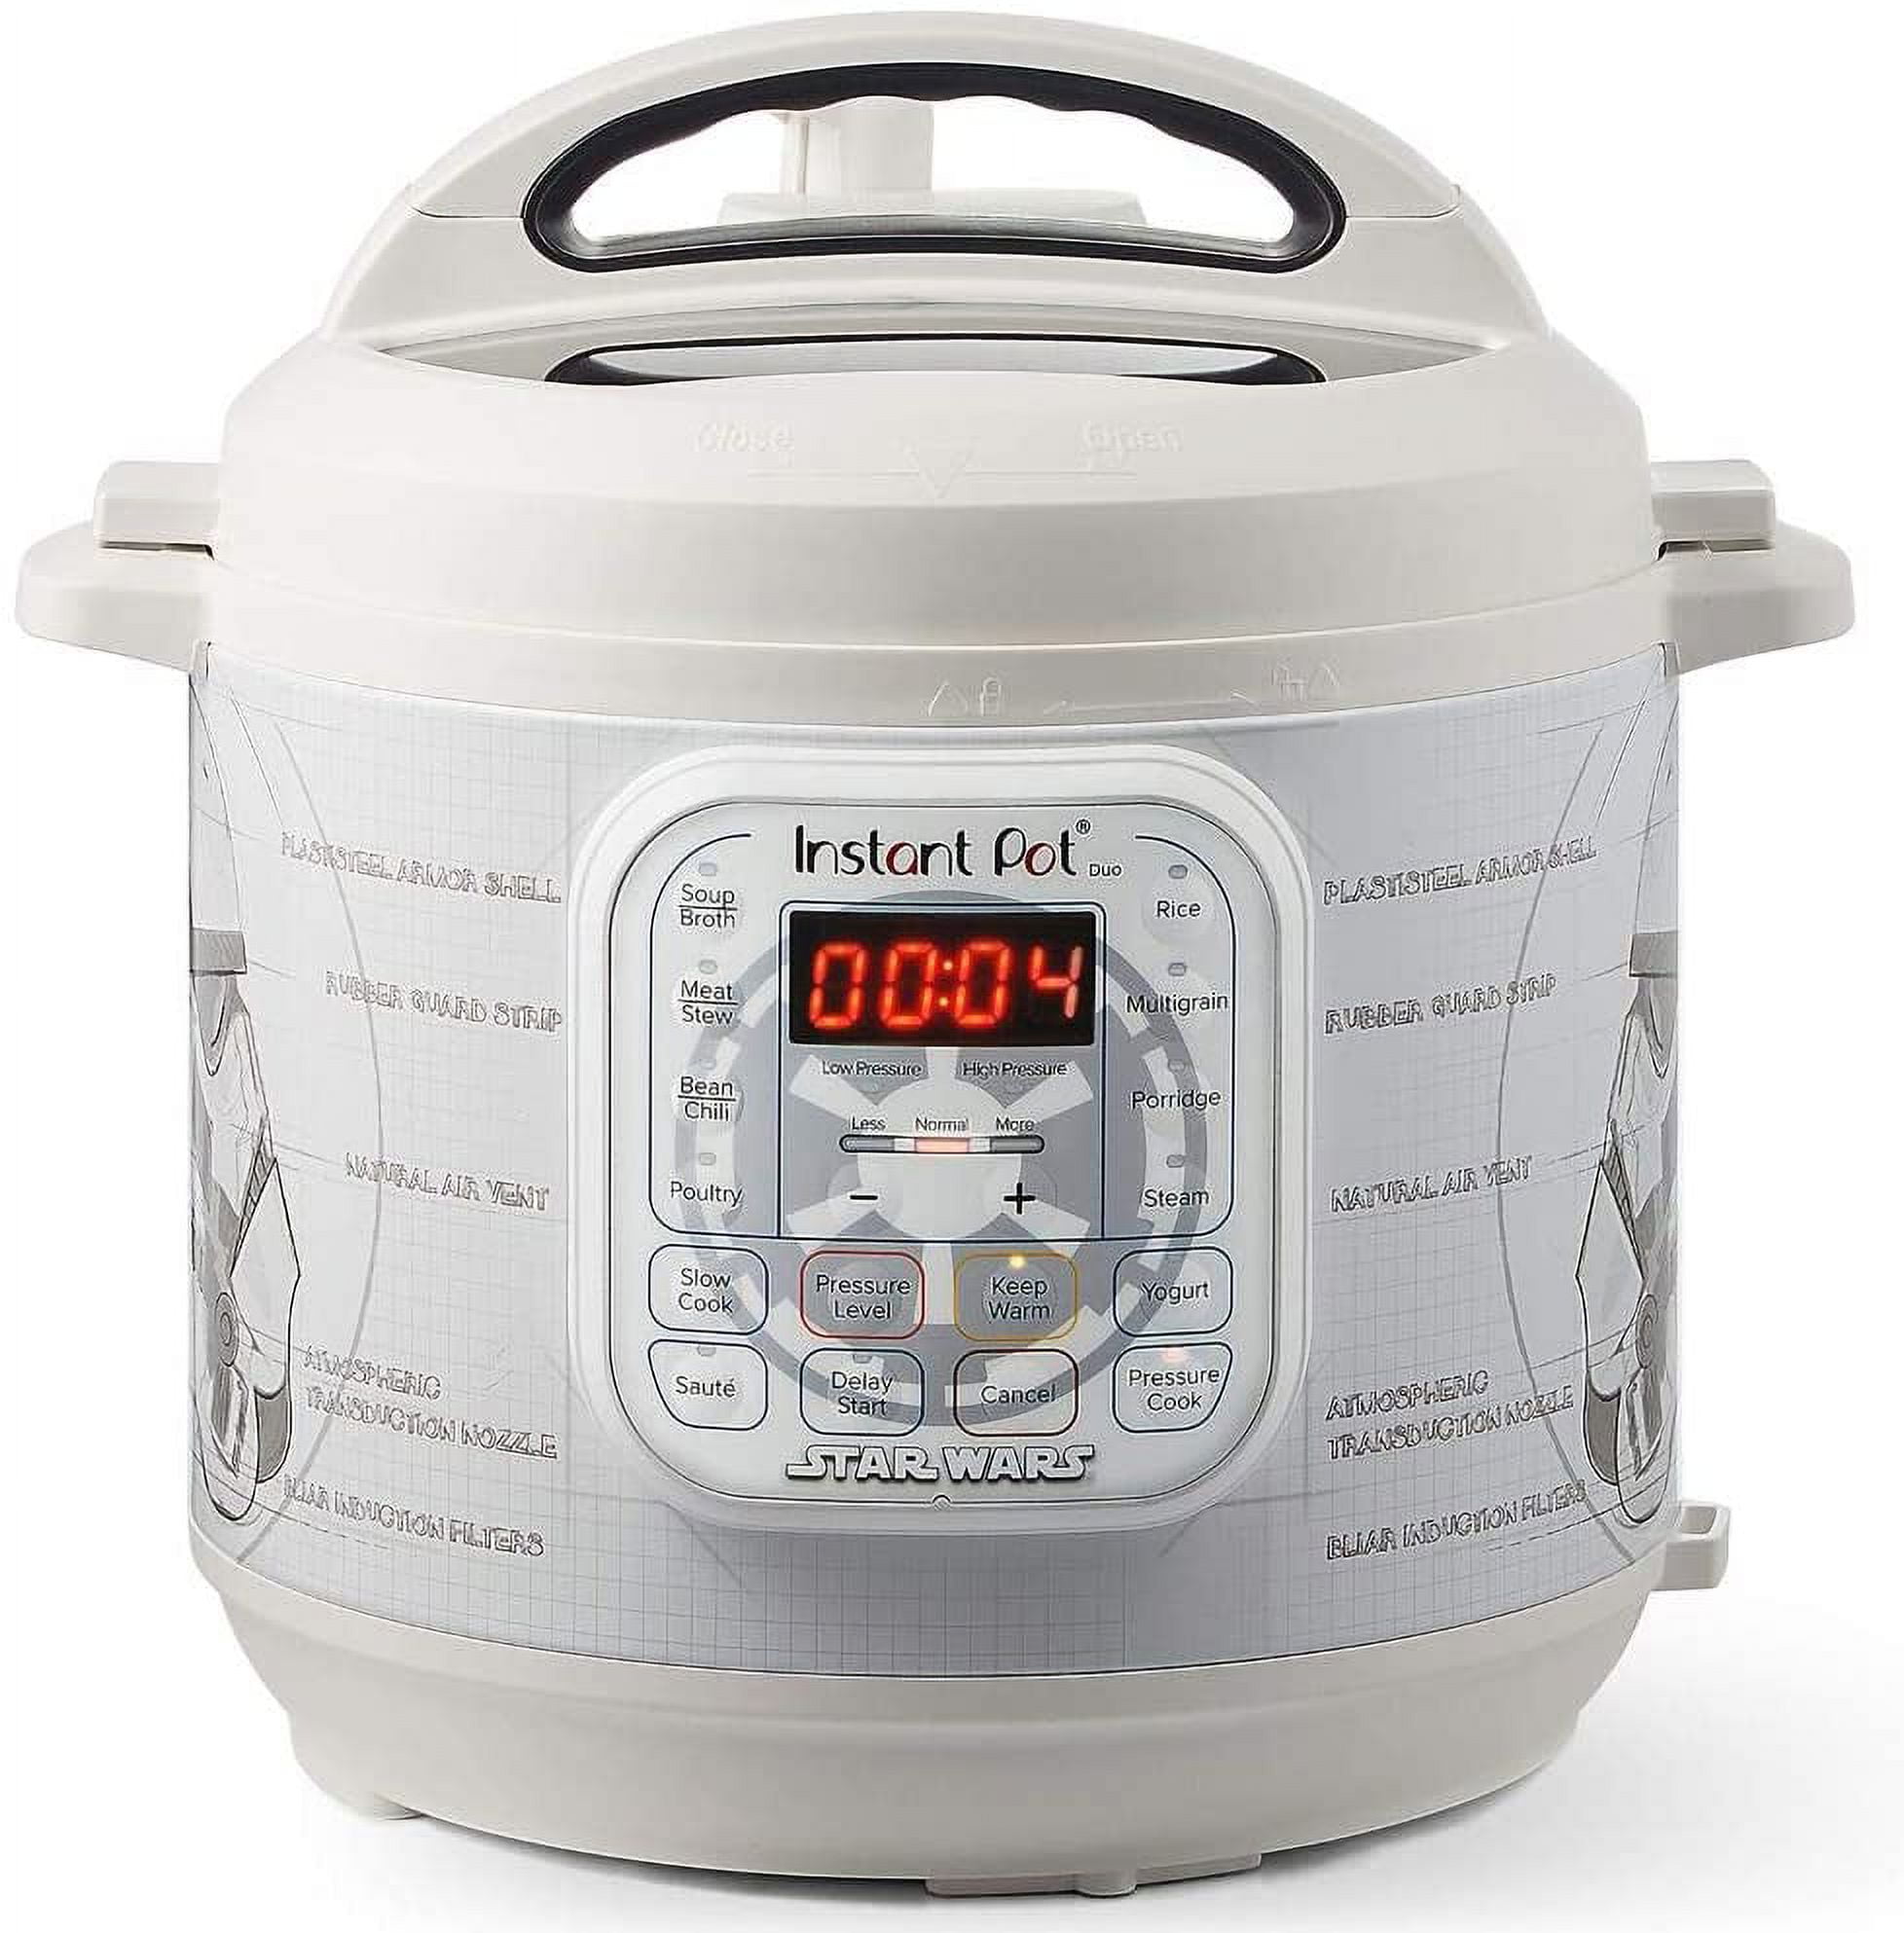 Star Wars Instant Pot (That Every Fan Needs) • FoodnService